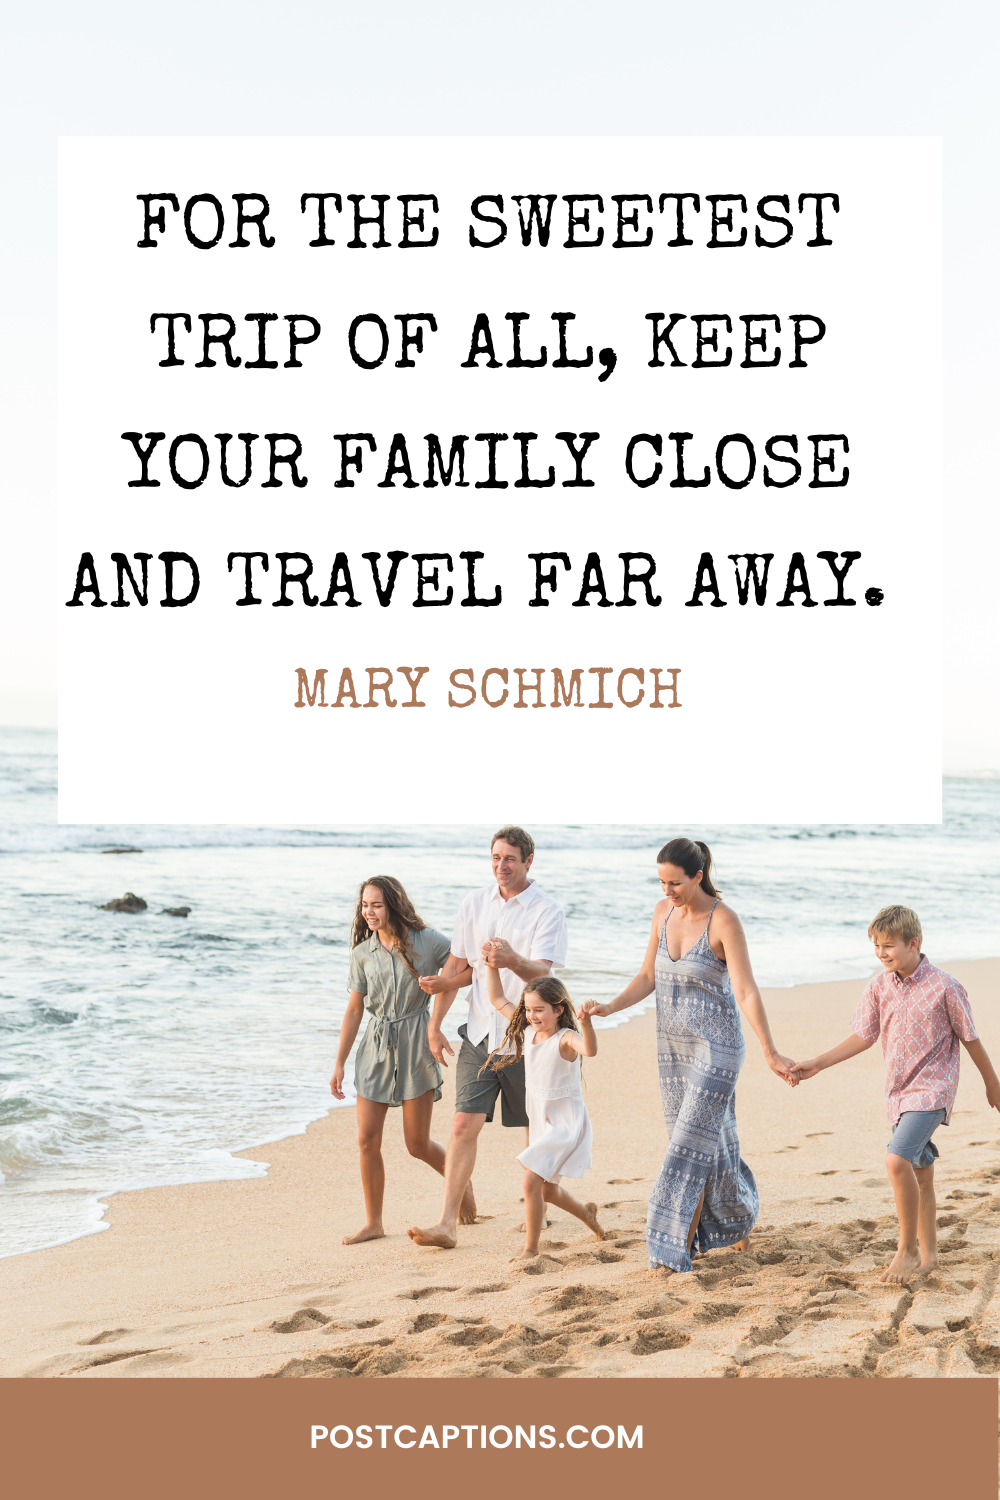 Family trip quotes for Instagram